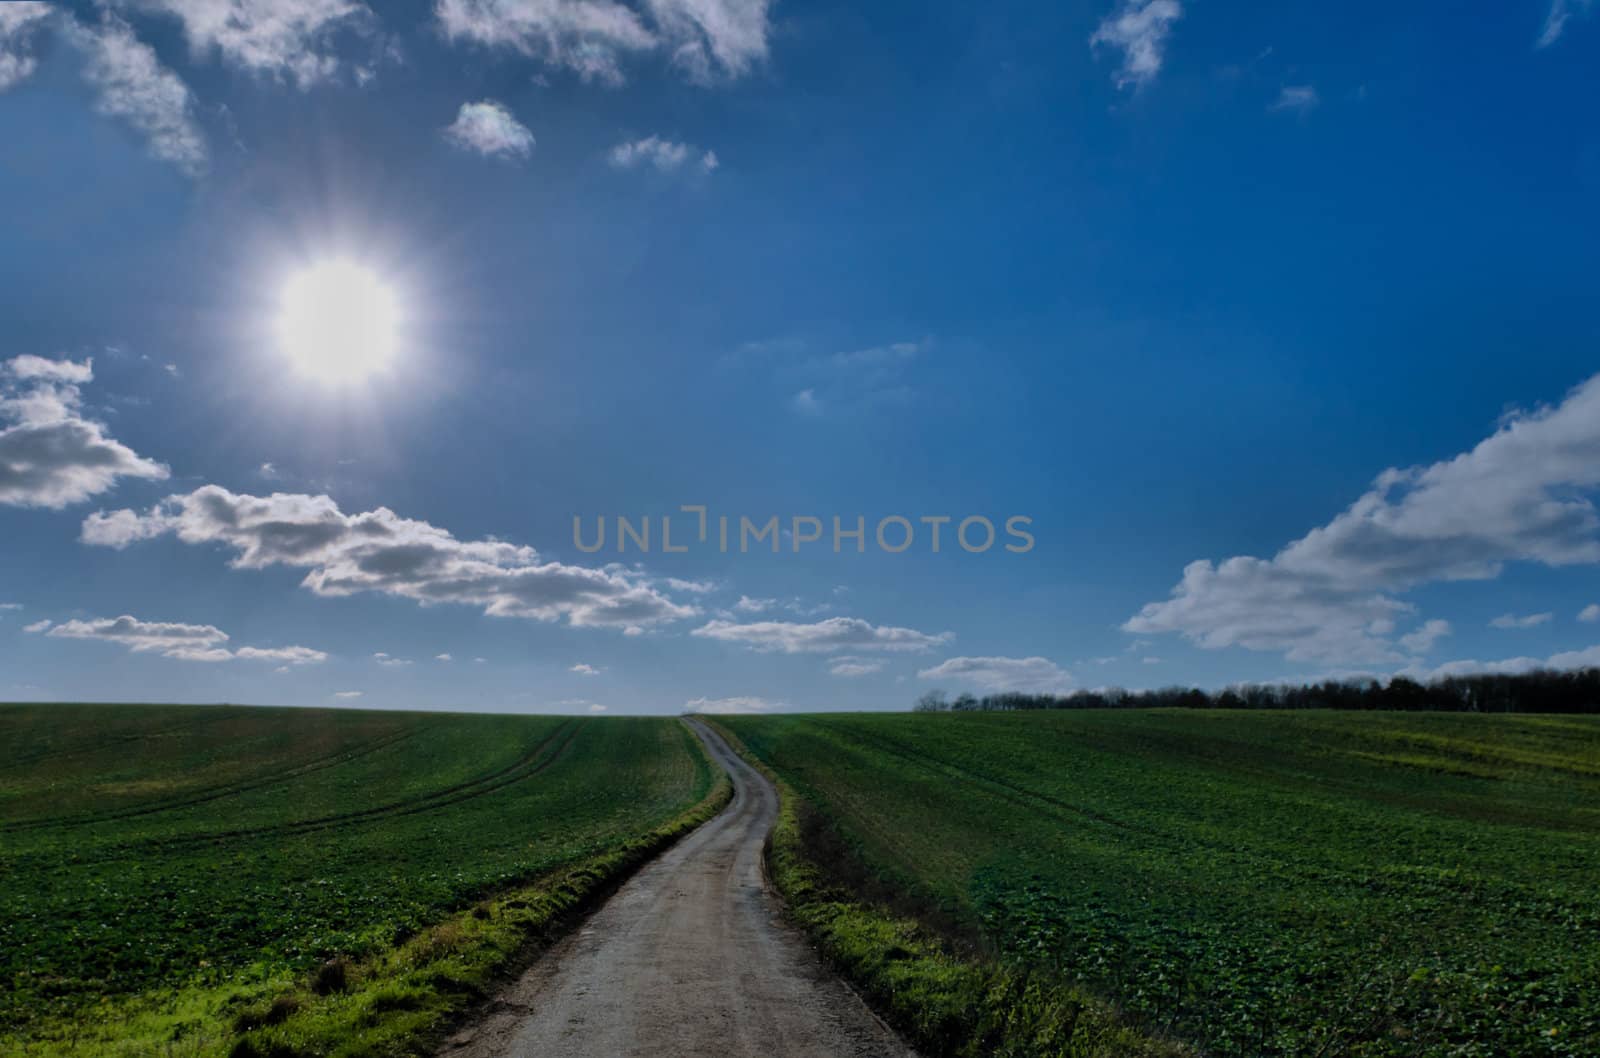 Narrow country lane winding between fields with a bright blue sky.
Kent  UK